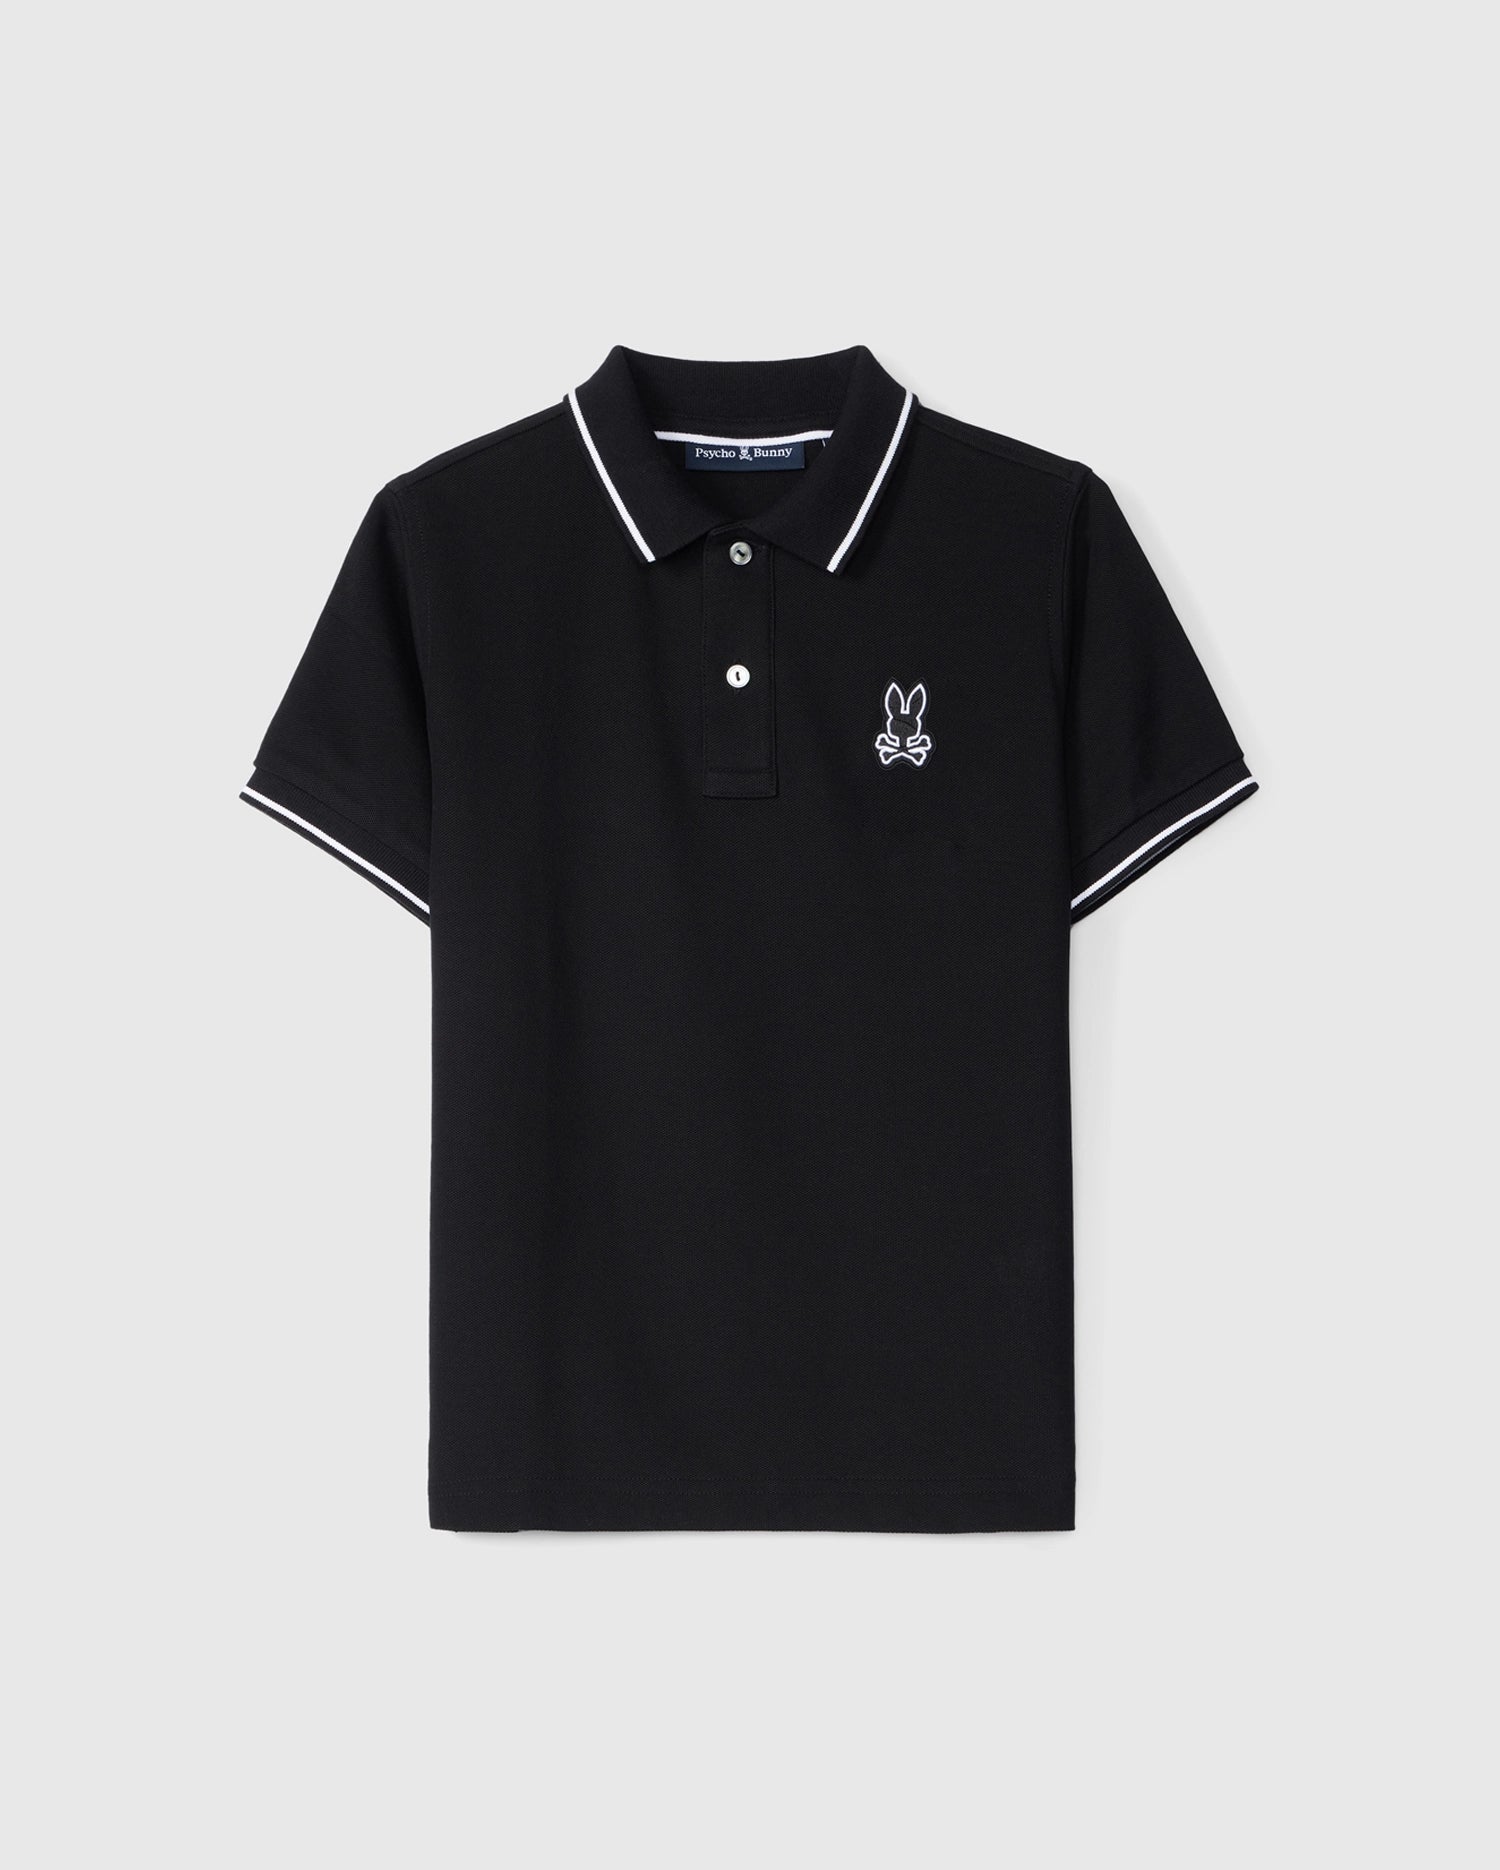 A black Pima cotton polo shirt with white tipping on the collar and sleeves. It features a three-button placket with mother-of-pearl buttons and an embroidered Bunny logo on the left chest. The Psycho Bunny MENS LENOX PIQUE POLO SHIRT - B6K138B200 is displayed on a plain white background.